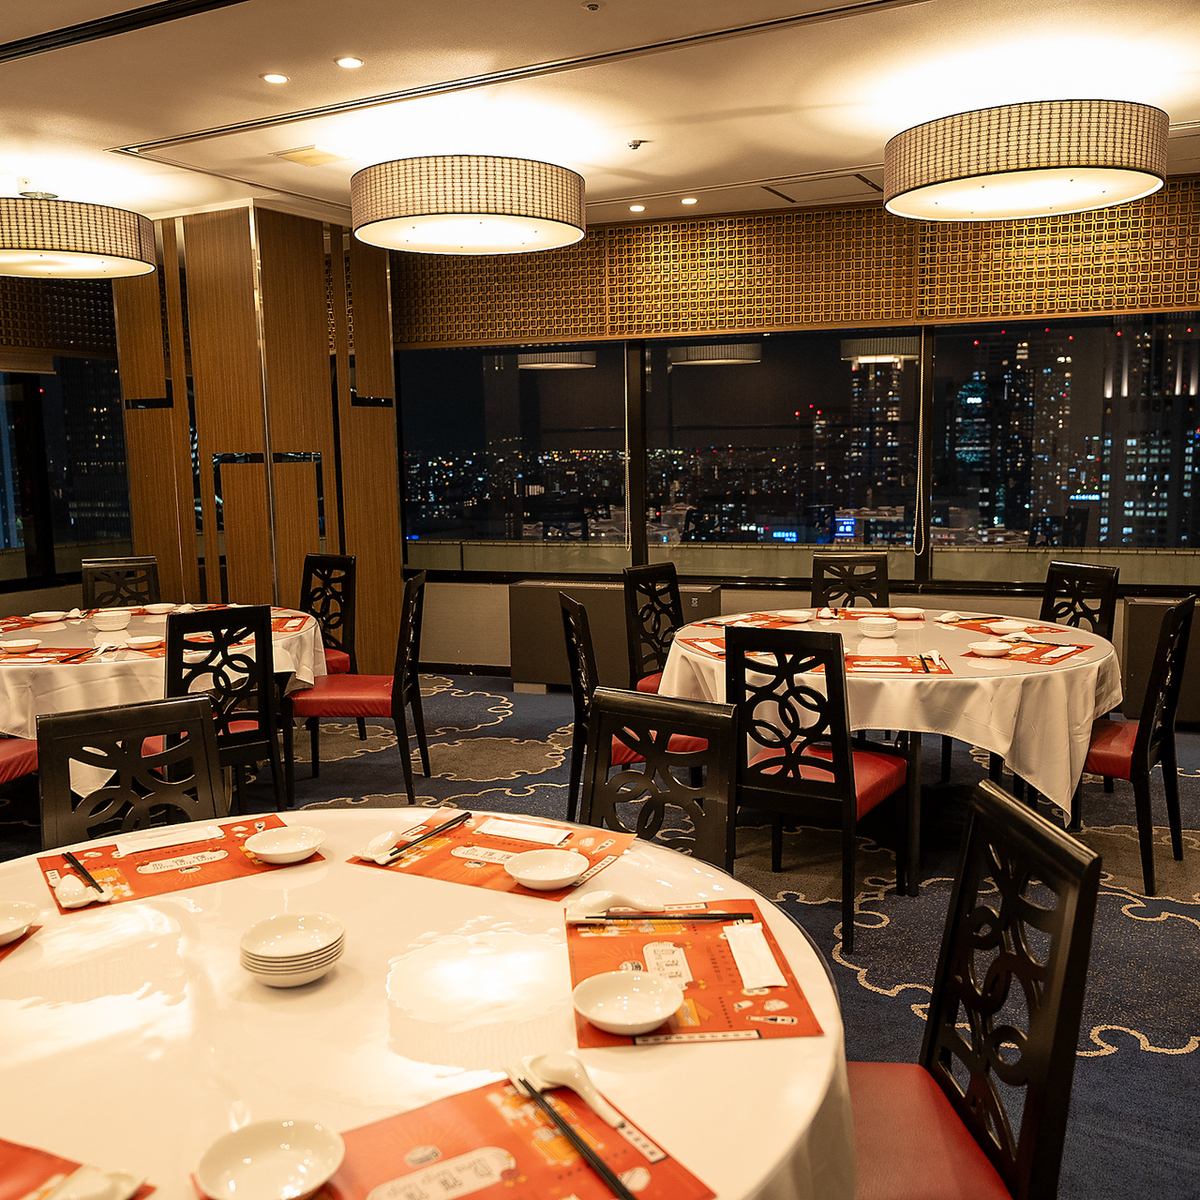 We also have private rooms available for large banquets with a view of the nightscape.